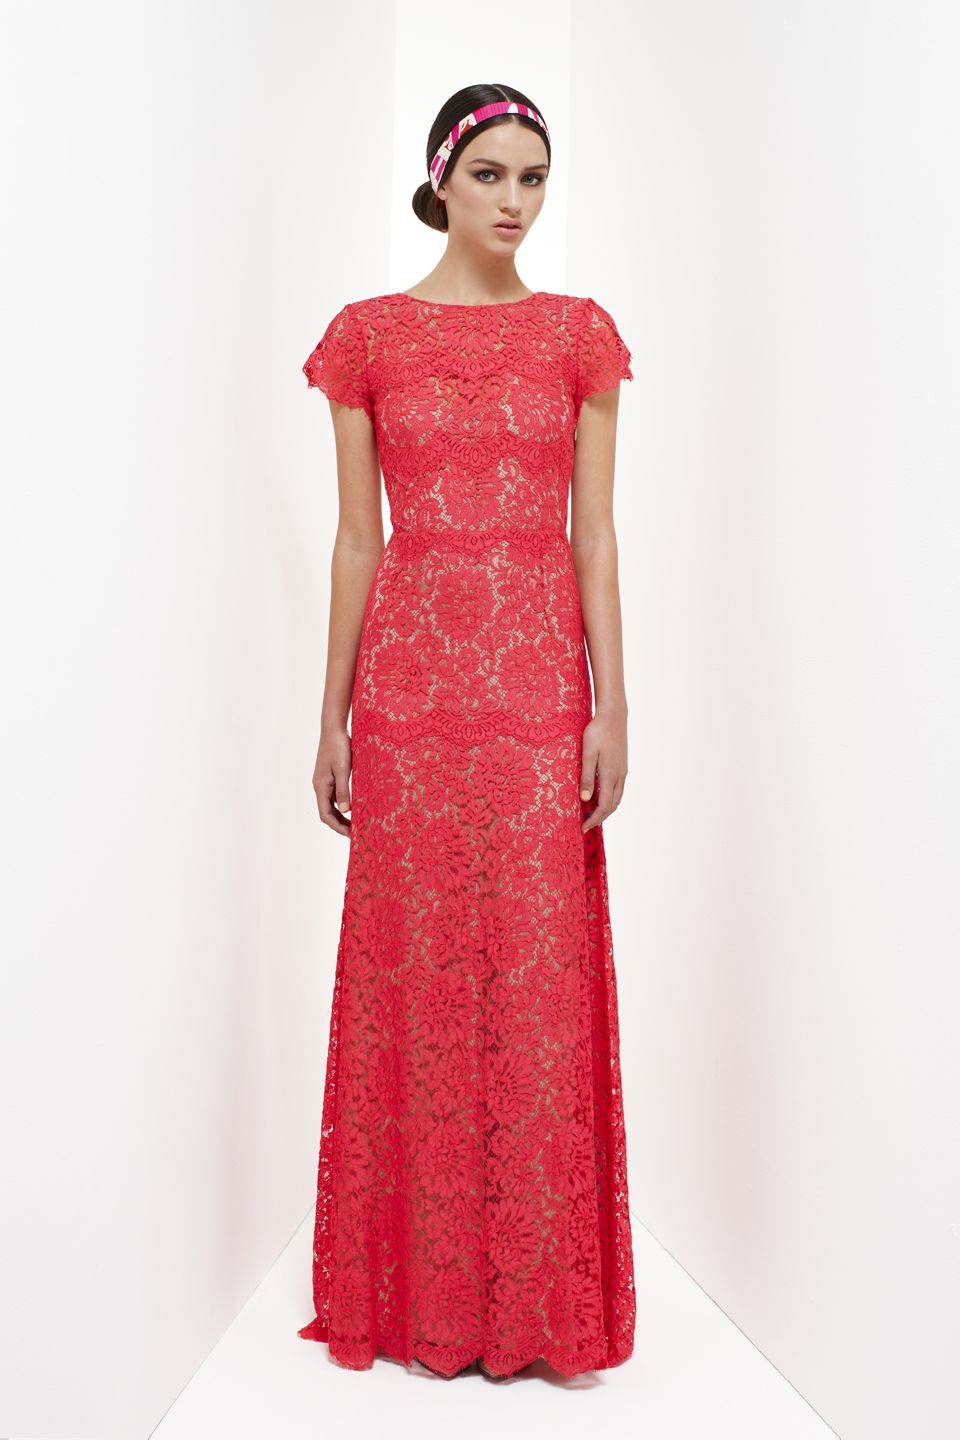 Resort 2013 – Collette DinniganCollette Dinnigan lace long gown, flamingo pink a